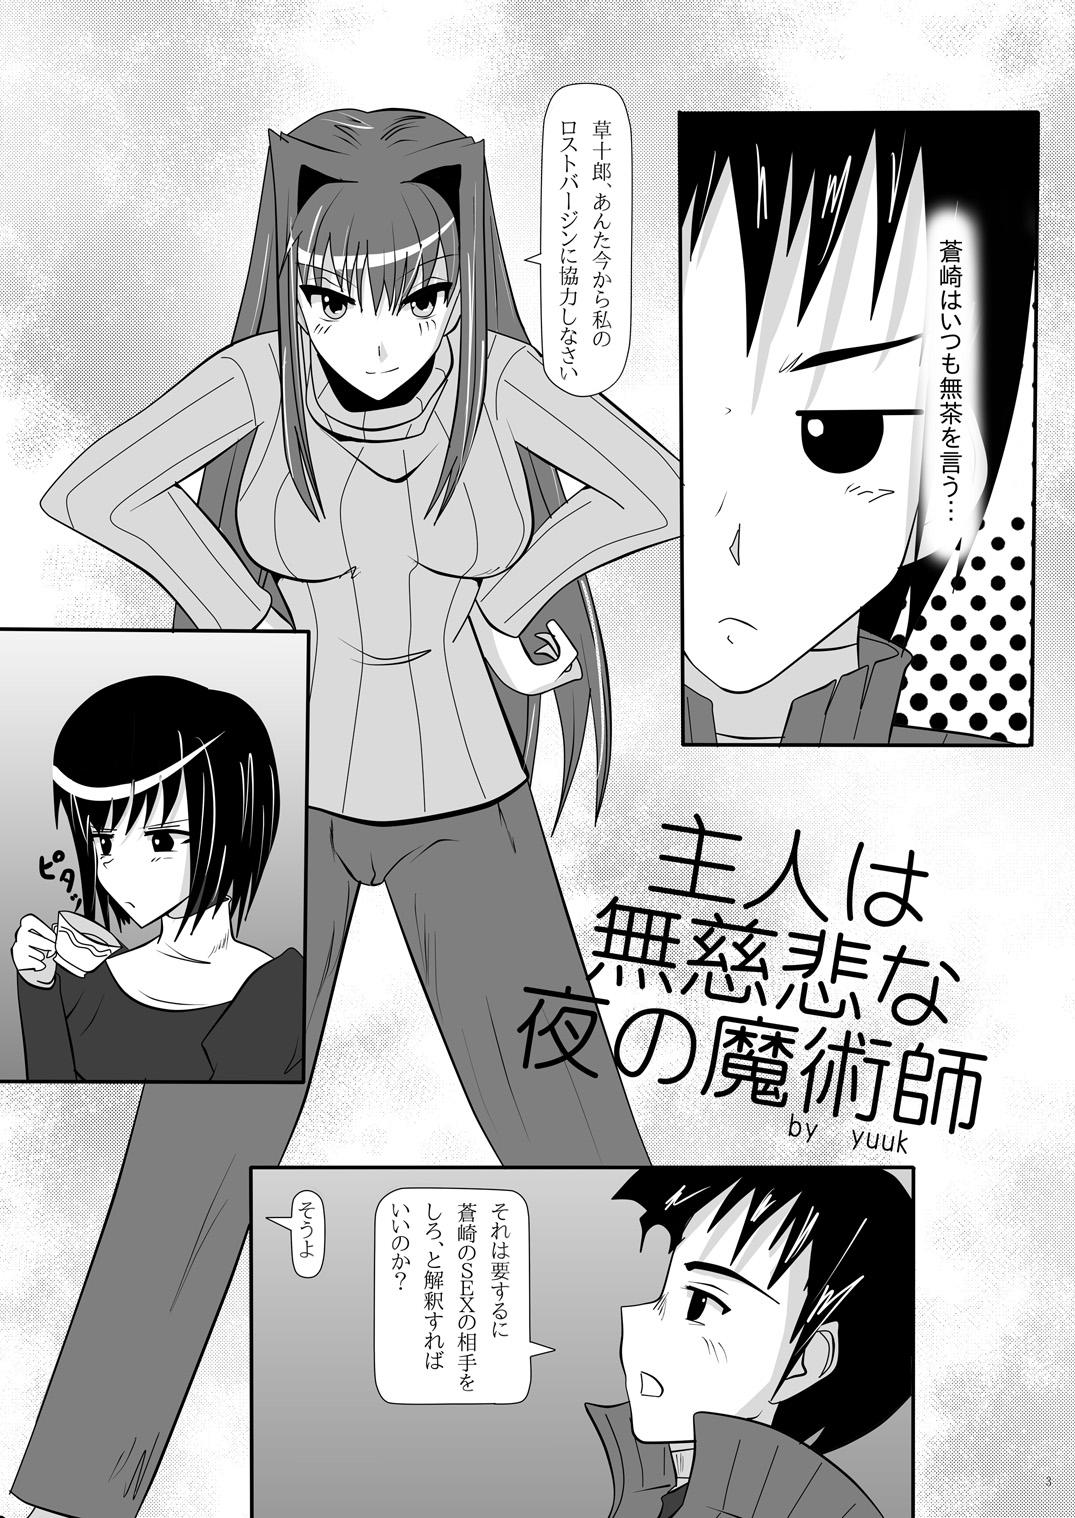 Roughsex smells like teen spirit - Mahou tsukai no yoru | witch on the holy night Sixtynine - Page 4